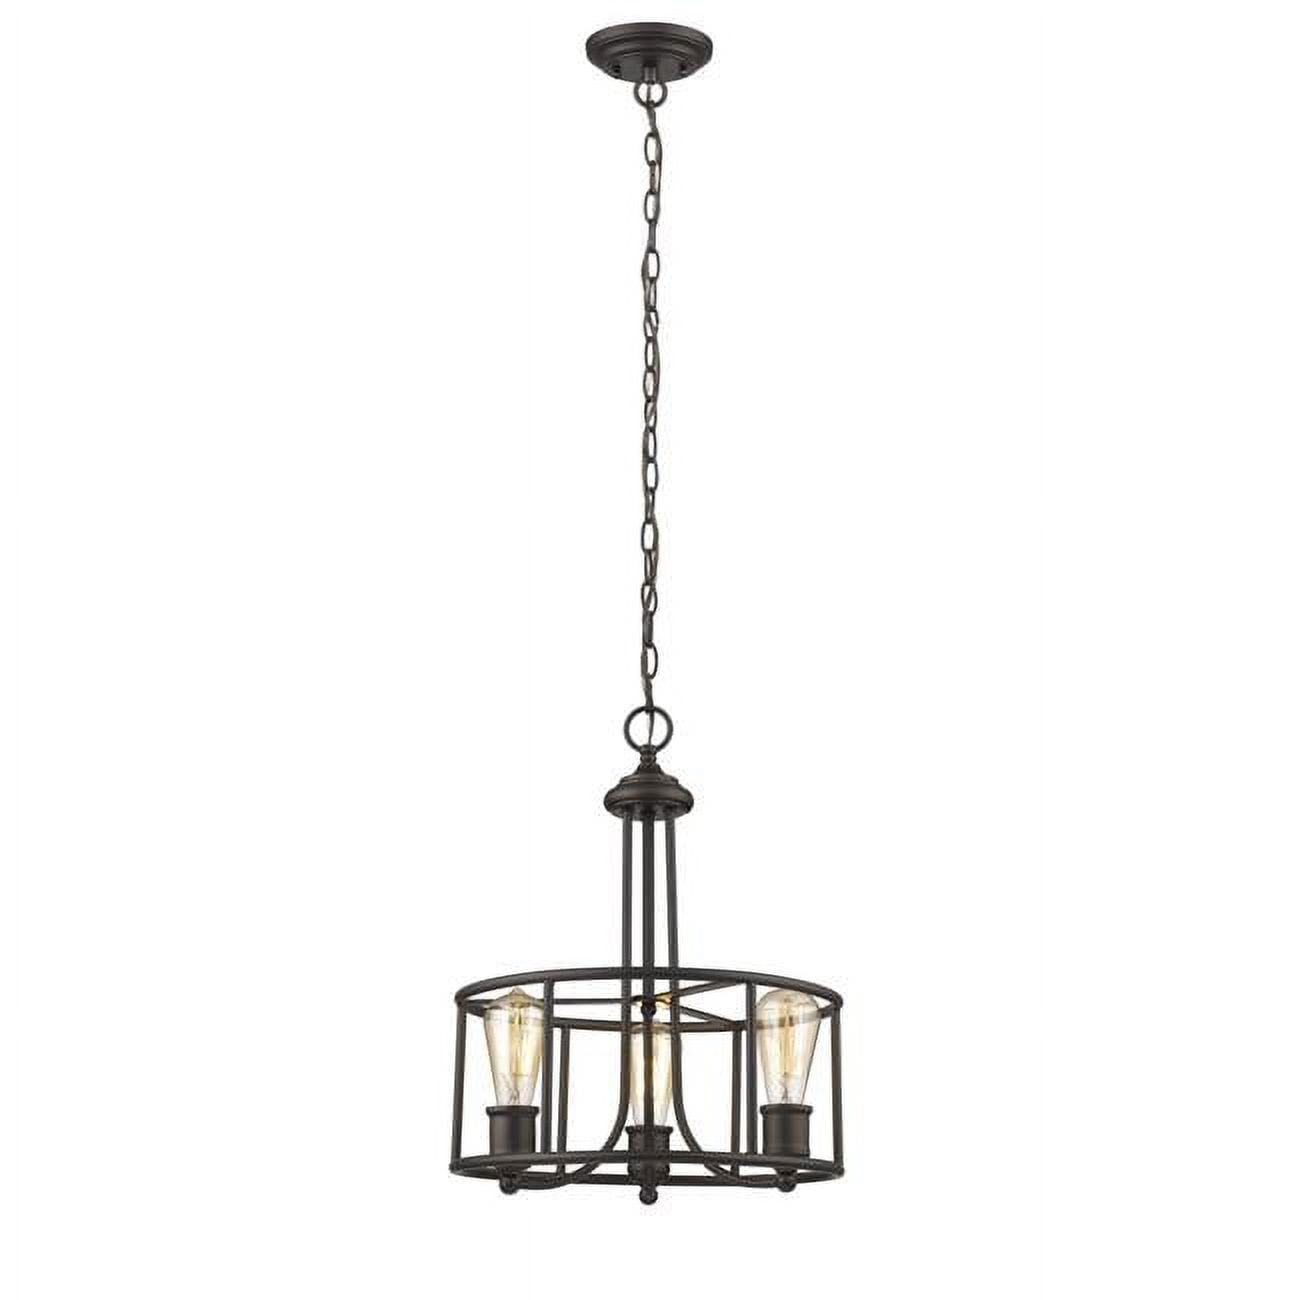 Ch2s004rb15-up3 Elissa Transitional 3 Light Rubbed Bronze Ceiling Pendant - 15 In.